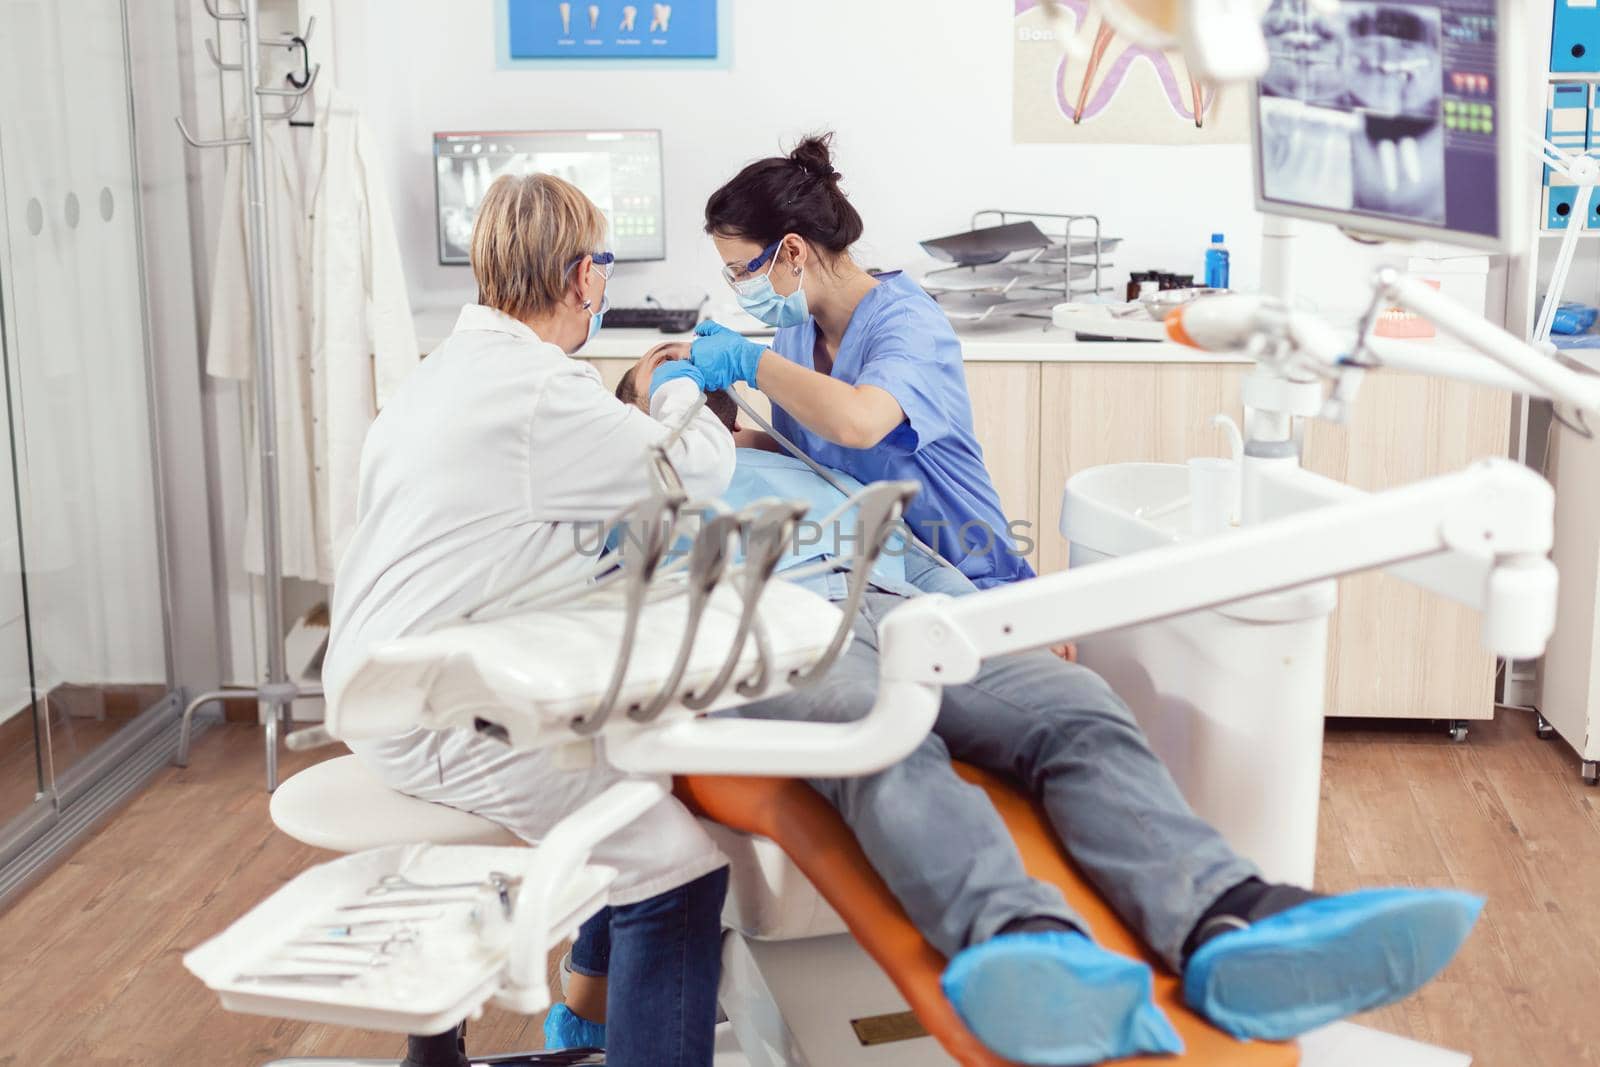 Sick man lying on stomatological chair while senior doctor taking care of tooth health. Orthodontic discussing to patient while nurse cleaning mouth during dental examination in stomatology clinic